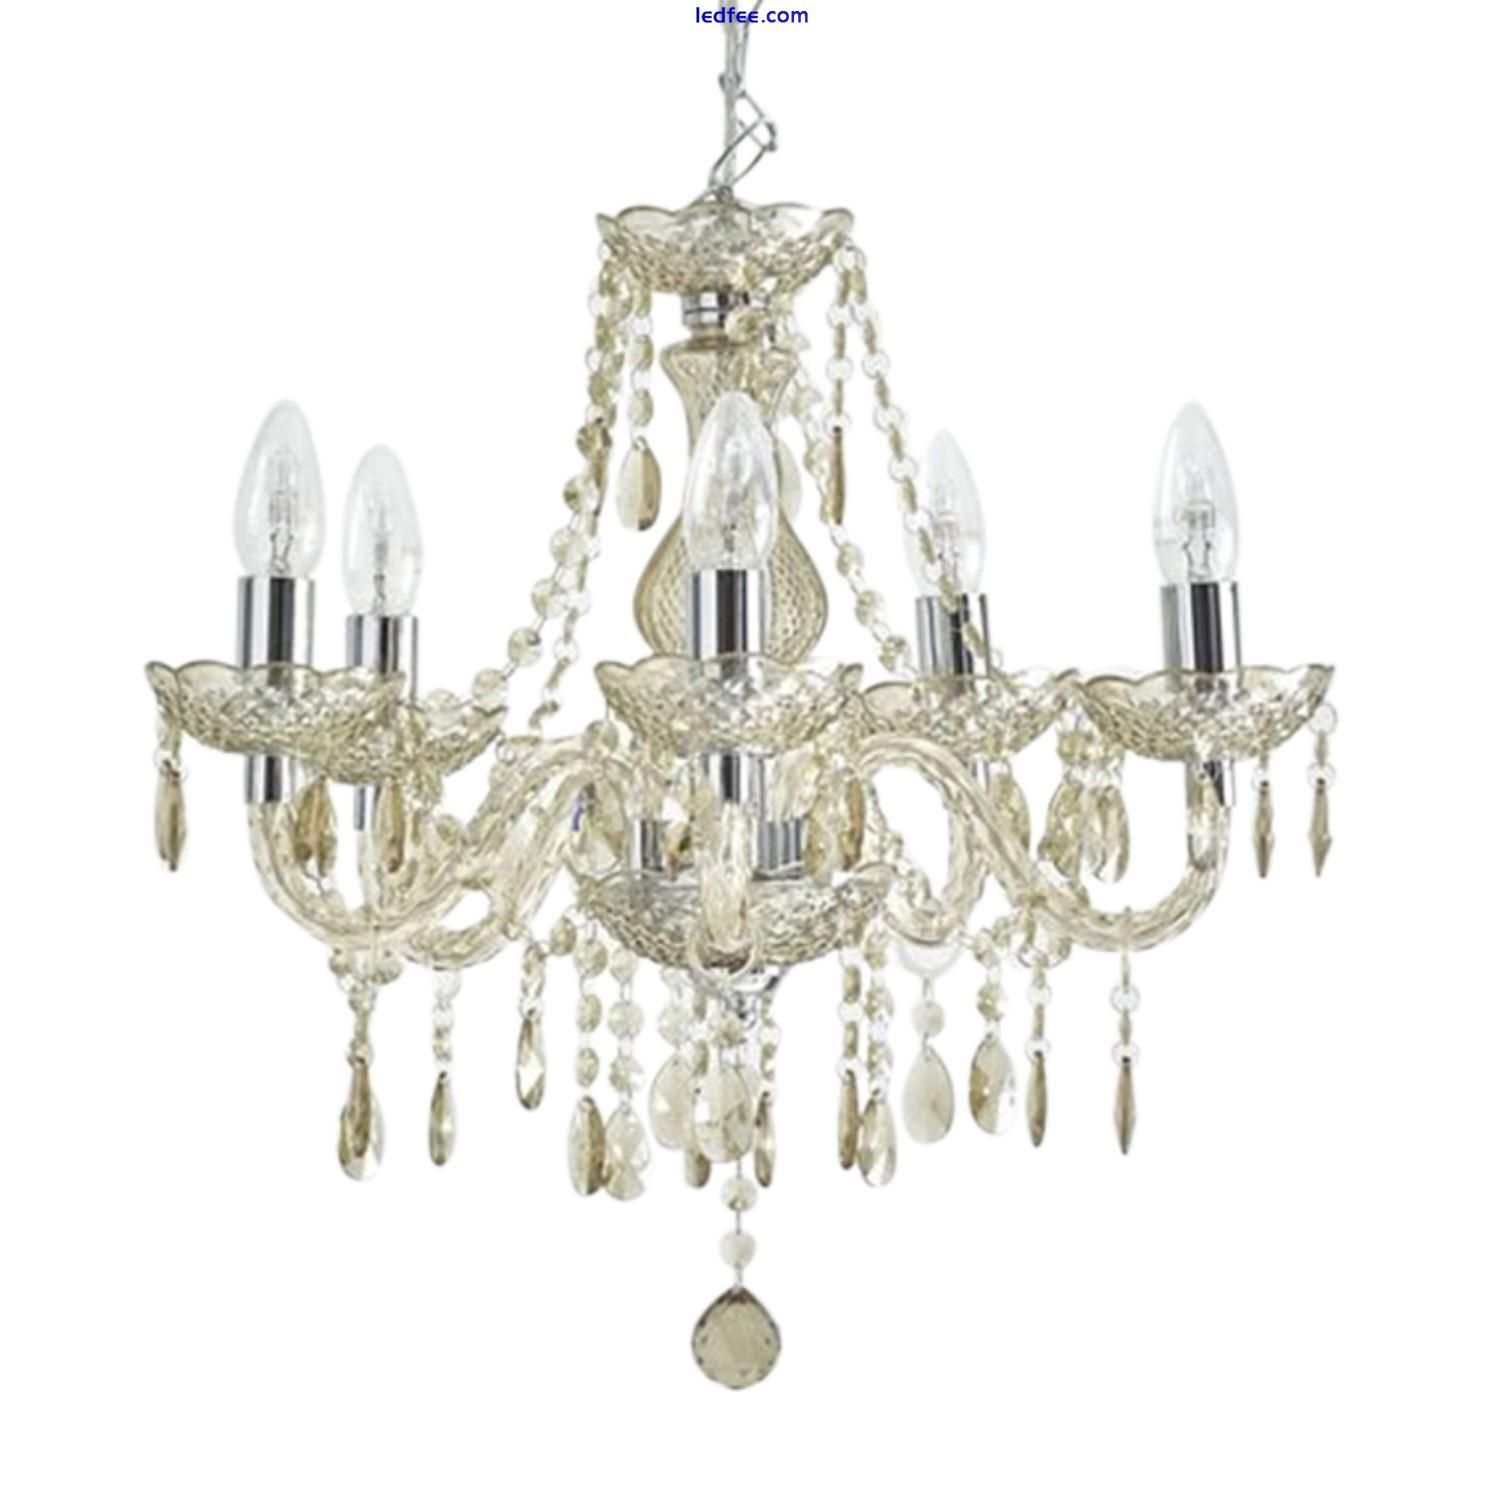 Marie Therese Chandelier Ceiling Light Crystal Effect 5 Arm - Champagne 0 